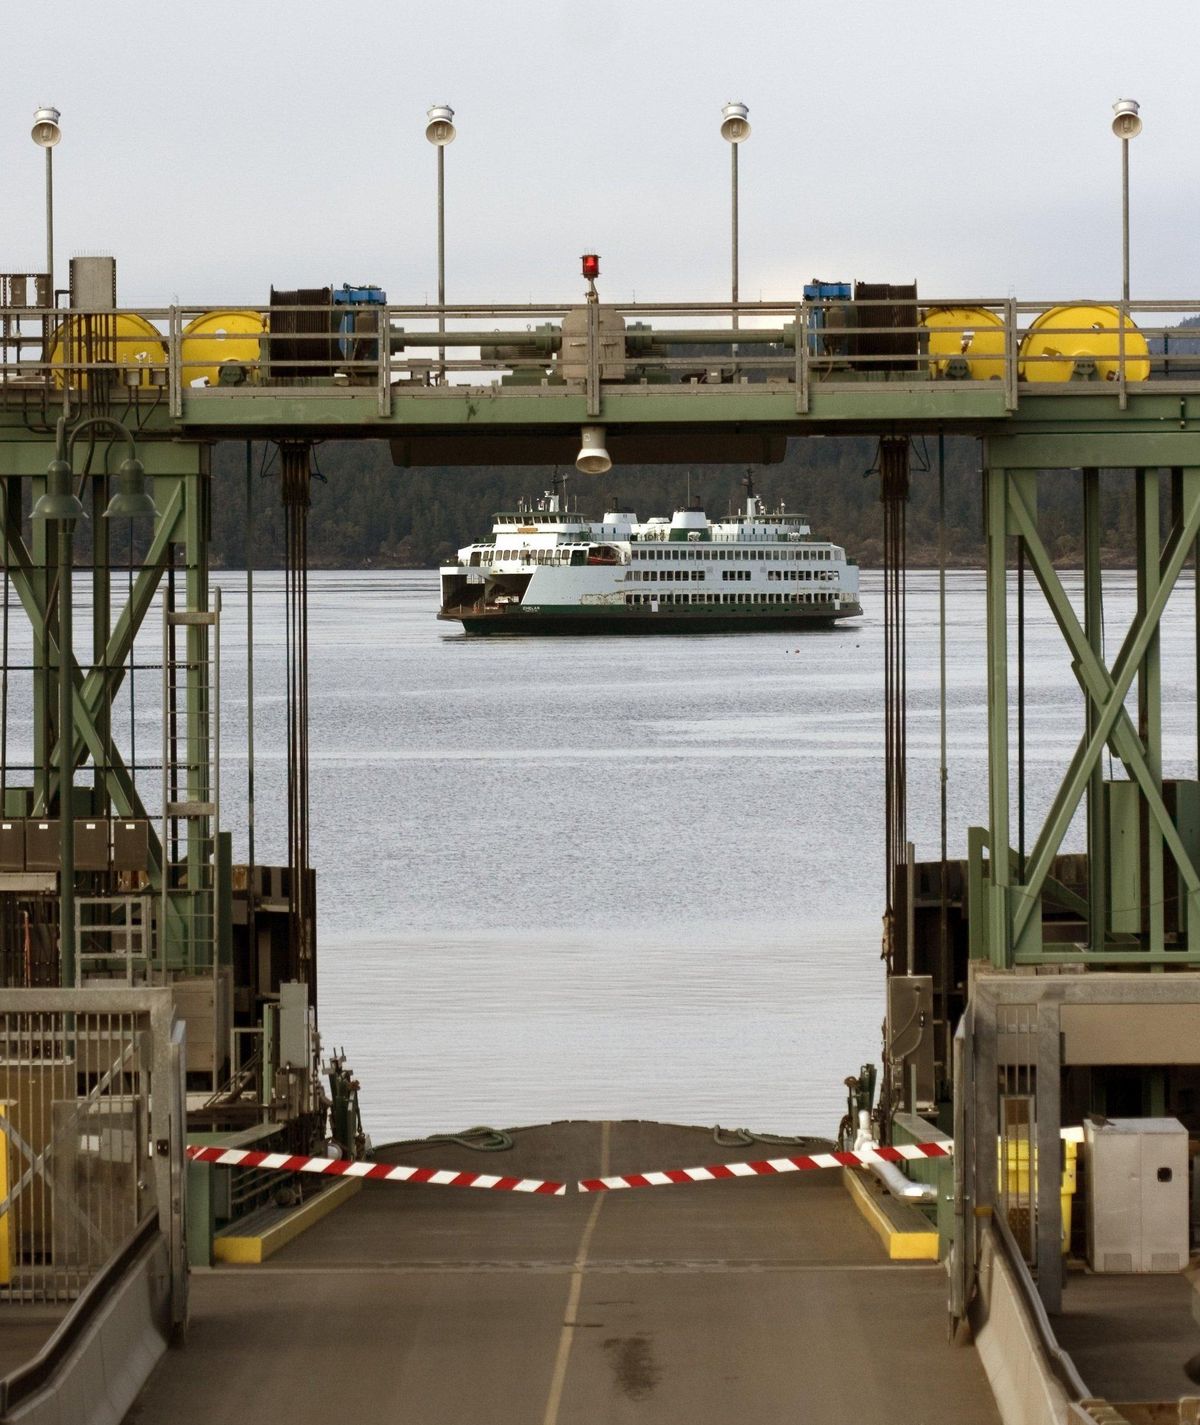 A Washington State ferry approaches the ferry dock in Friday Harbor, San Juan Island, Wash., April 9, 2008. (BETTY UDESEN / Associated Press)